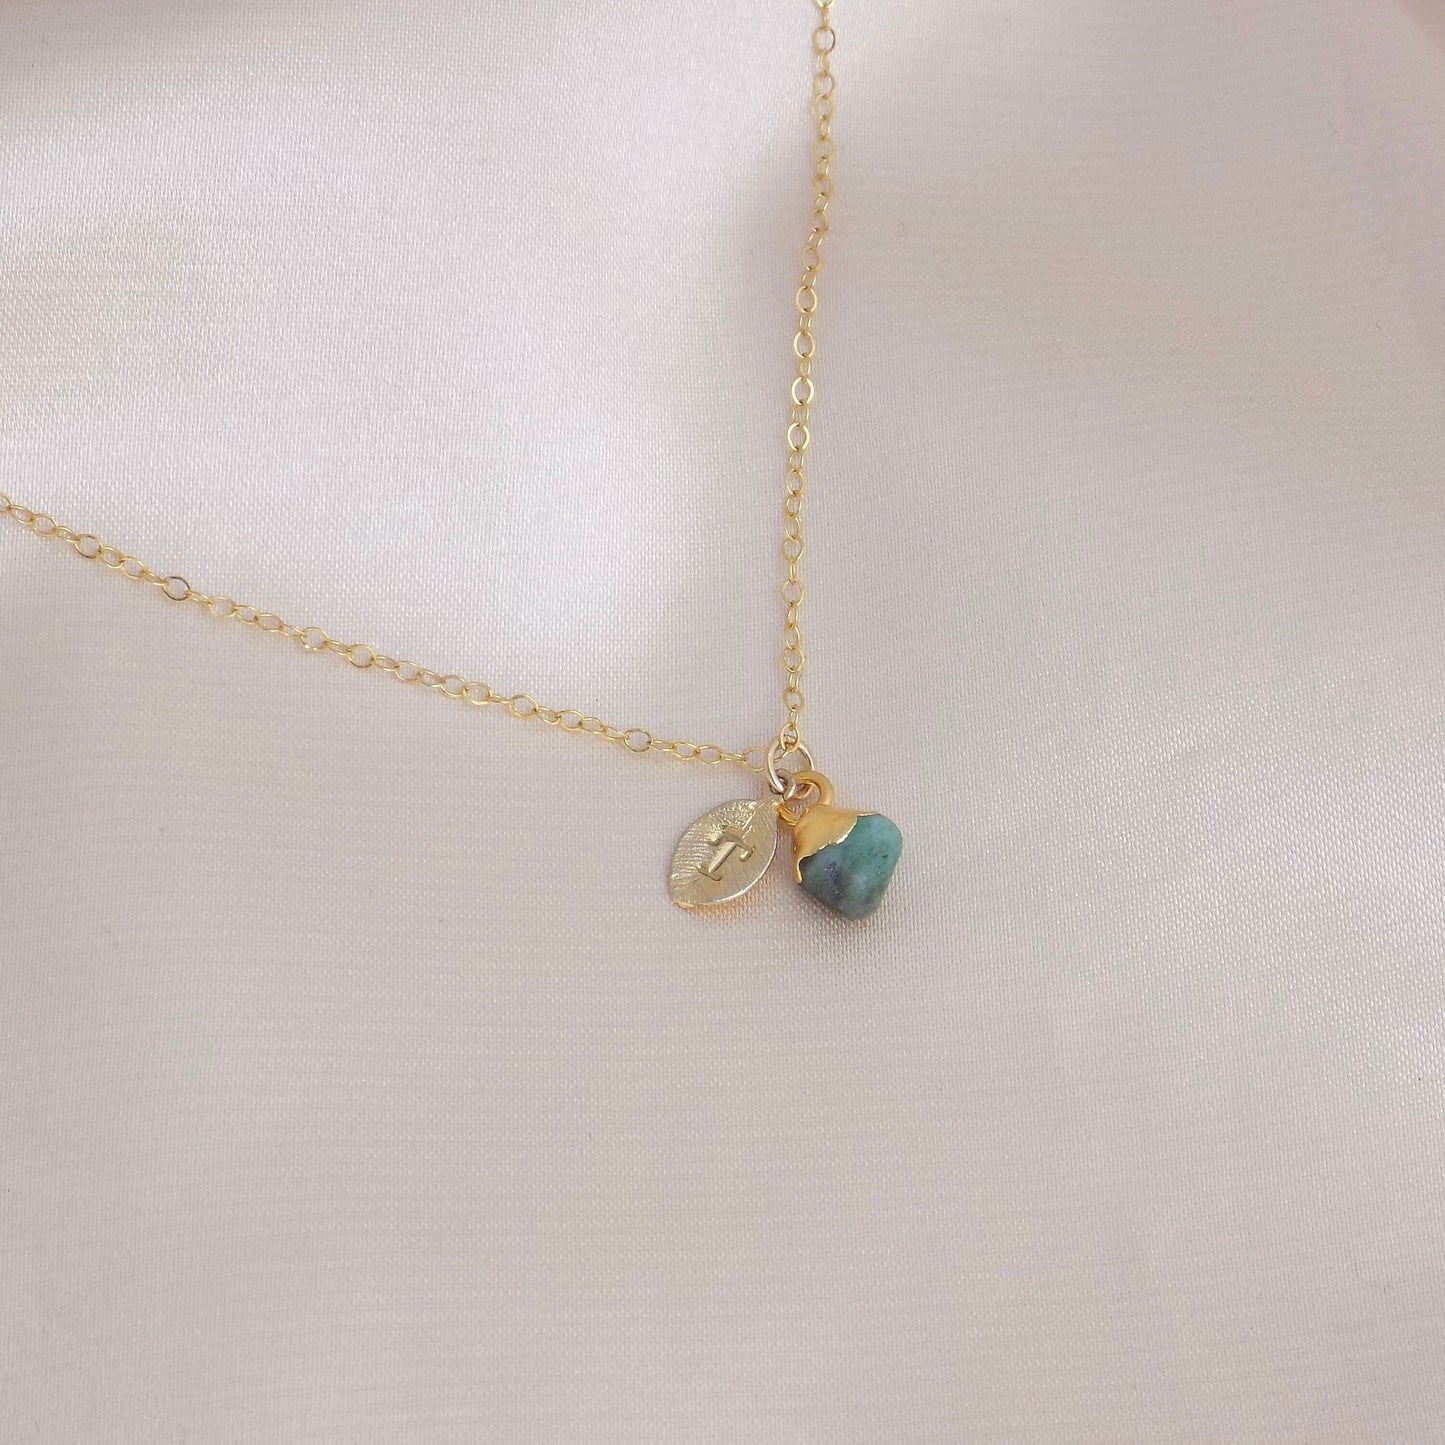 Tiny Raw Emerald Necklace, Personalized Green Emerald Gold, Gift For Her, M6-76